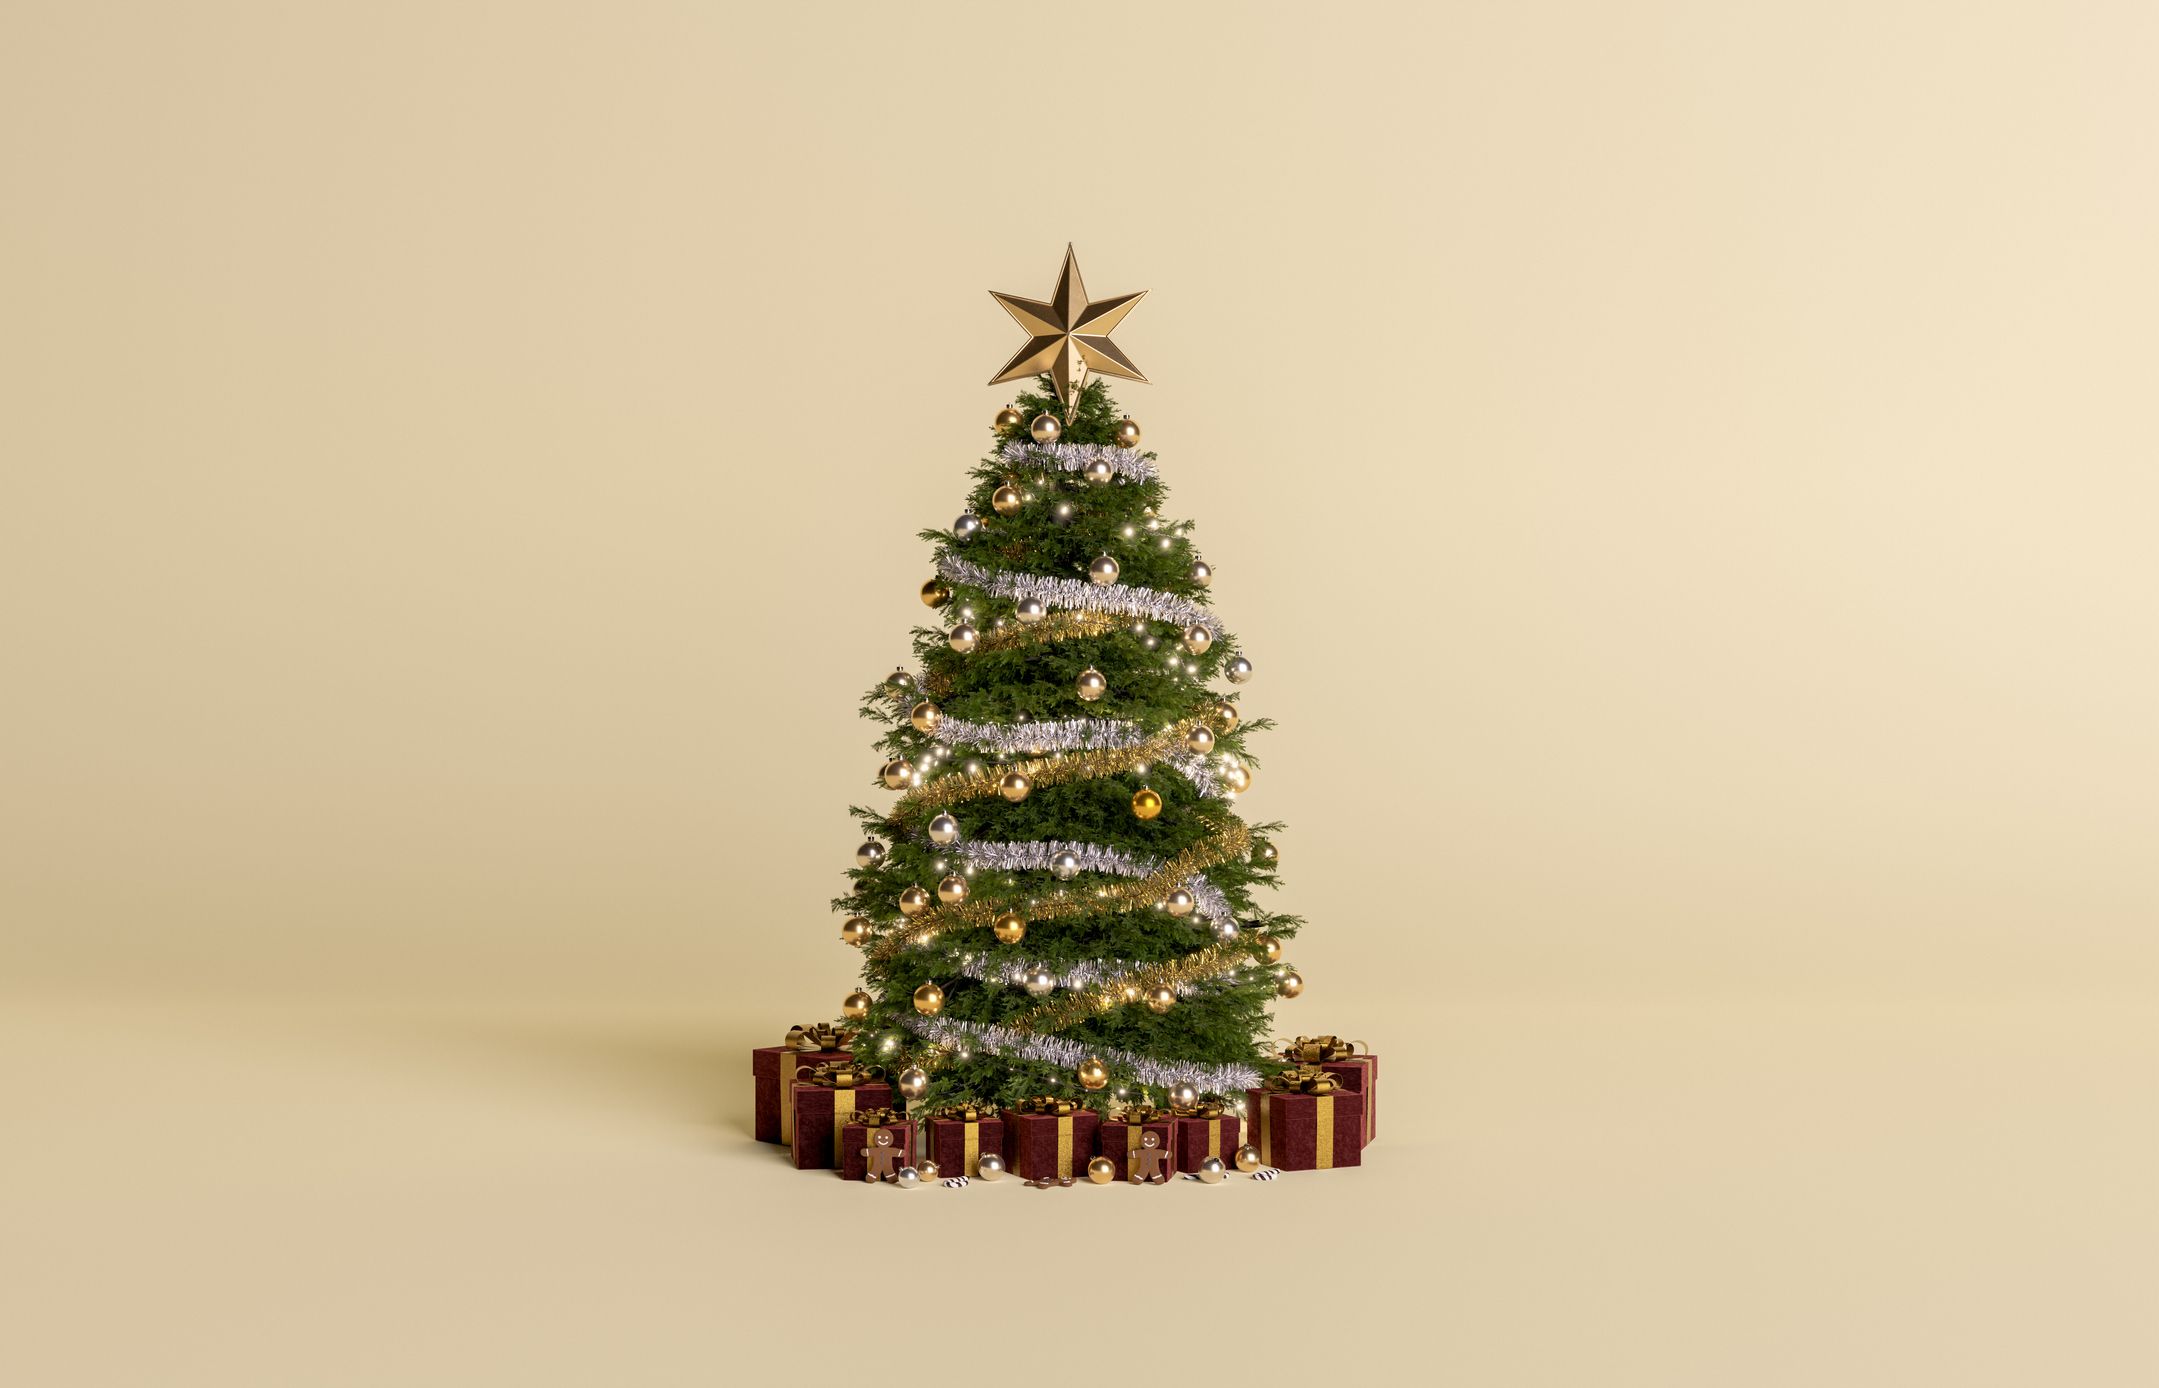 https://hips.hearstapps.com/hmg-prod/images/close-up-of-christmas-tree-against-black-background-royalty-free-image-1701804137.jpg